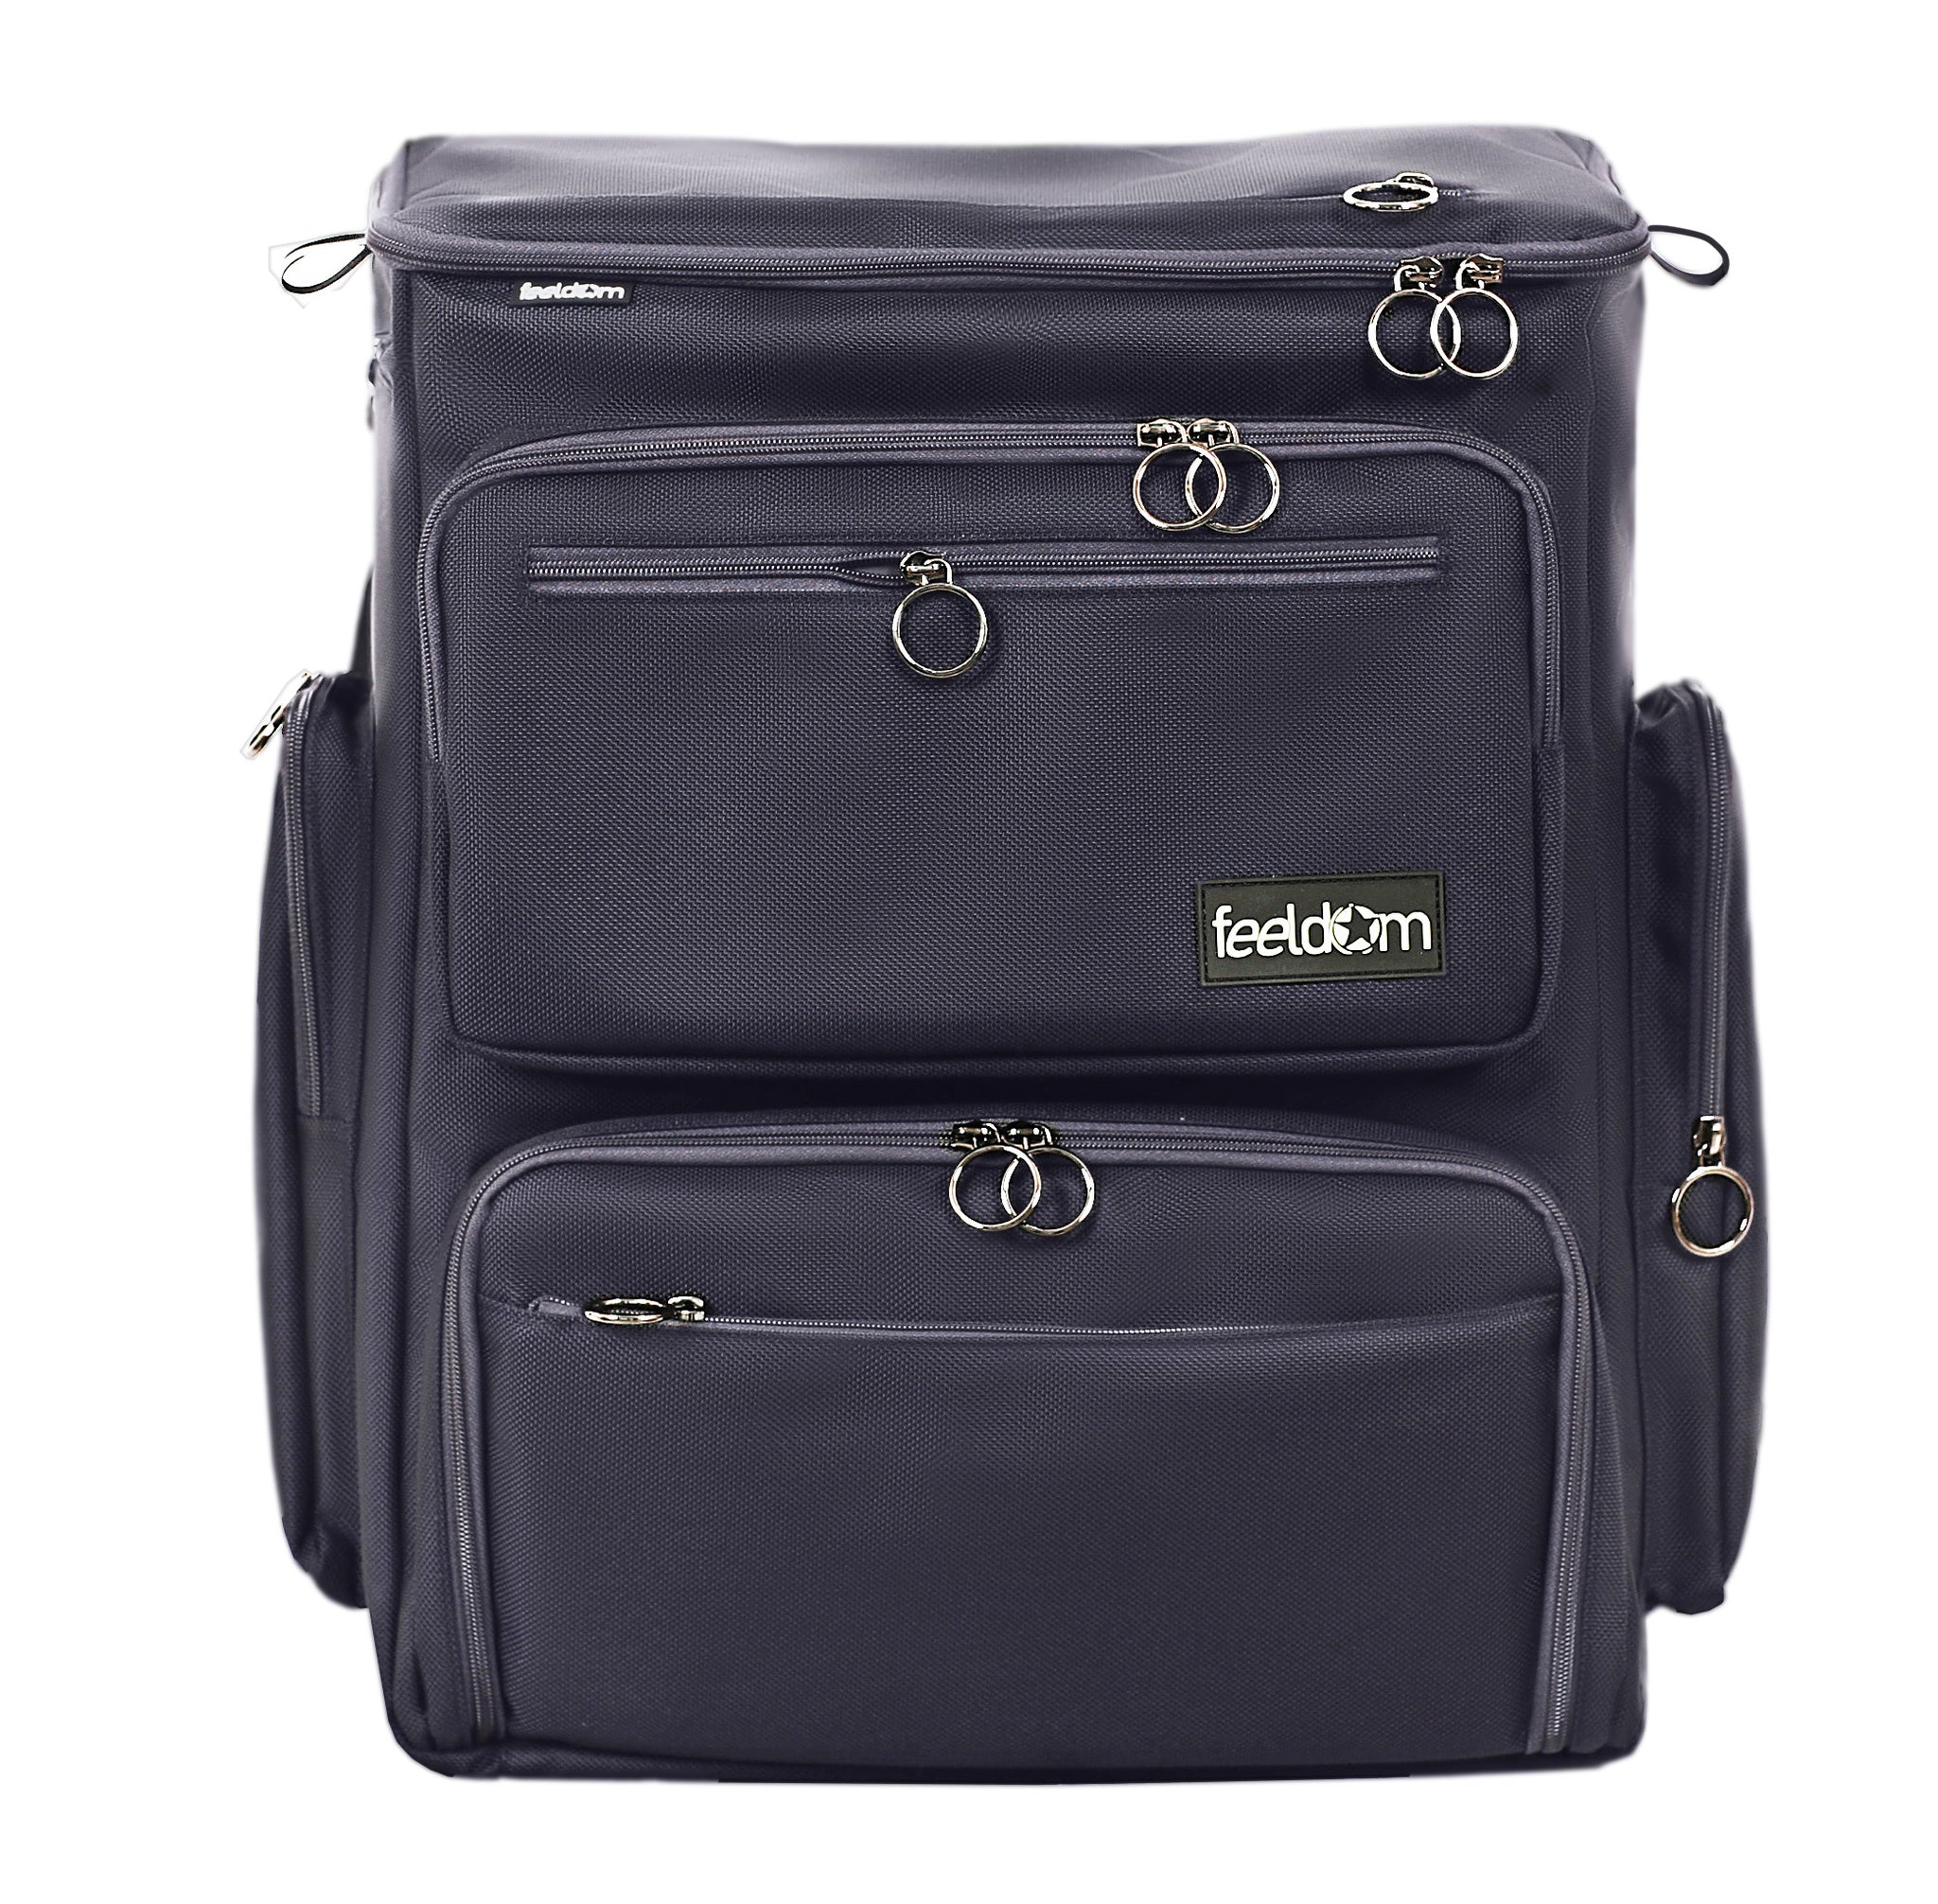 Feeldom Max Wheelchair bag in Large, Dark Navy. Rectangular front pockets have another pocket inside that. Side pockets are 11 inches high.